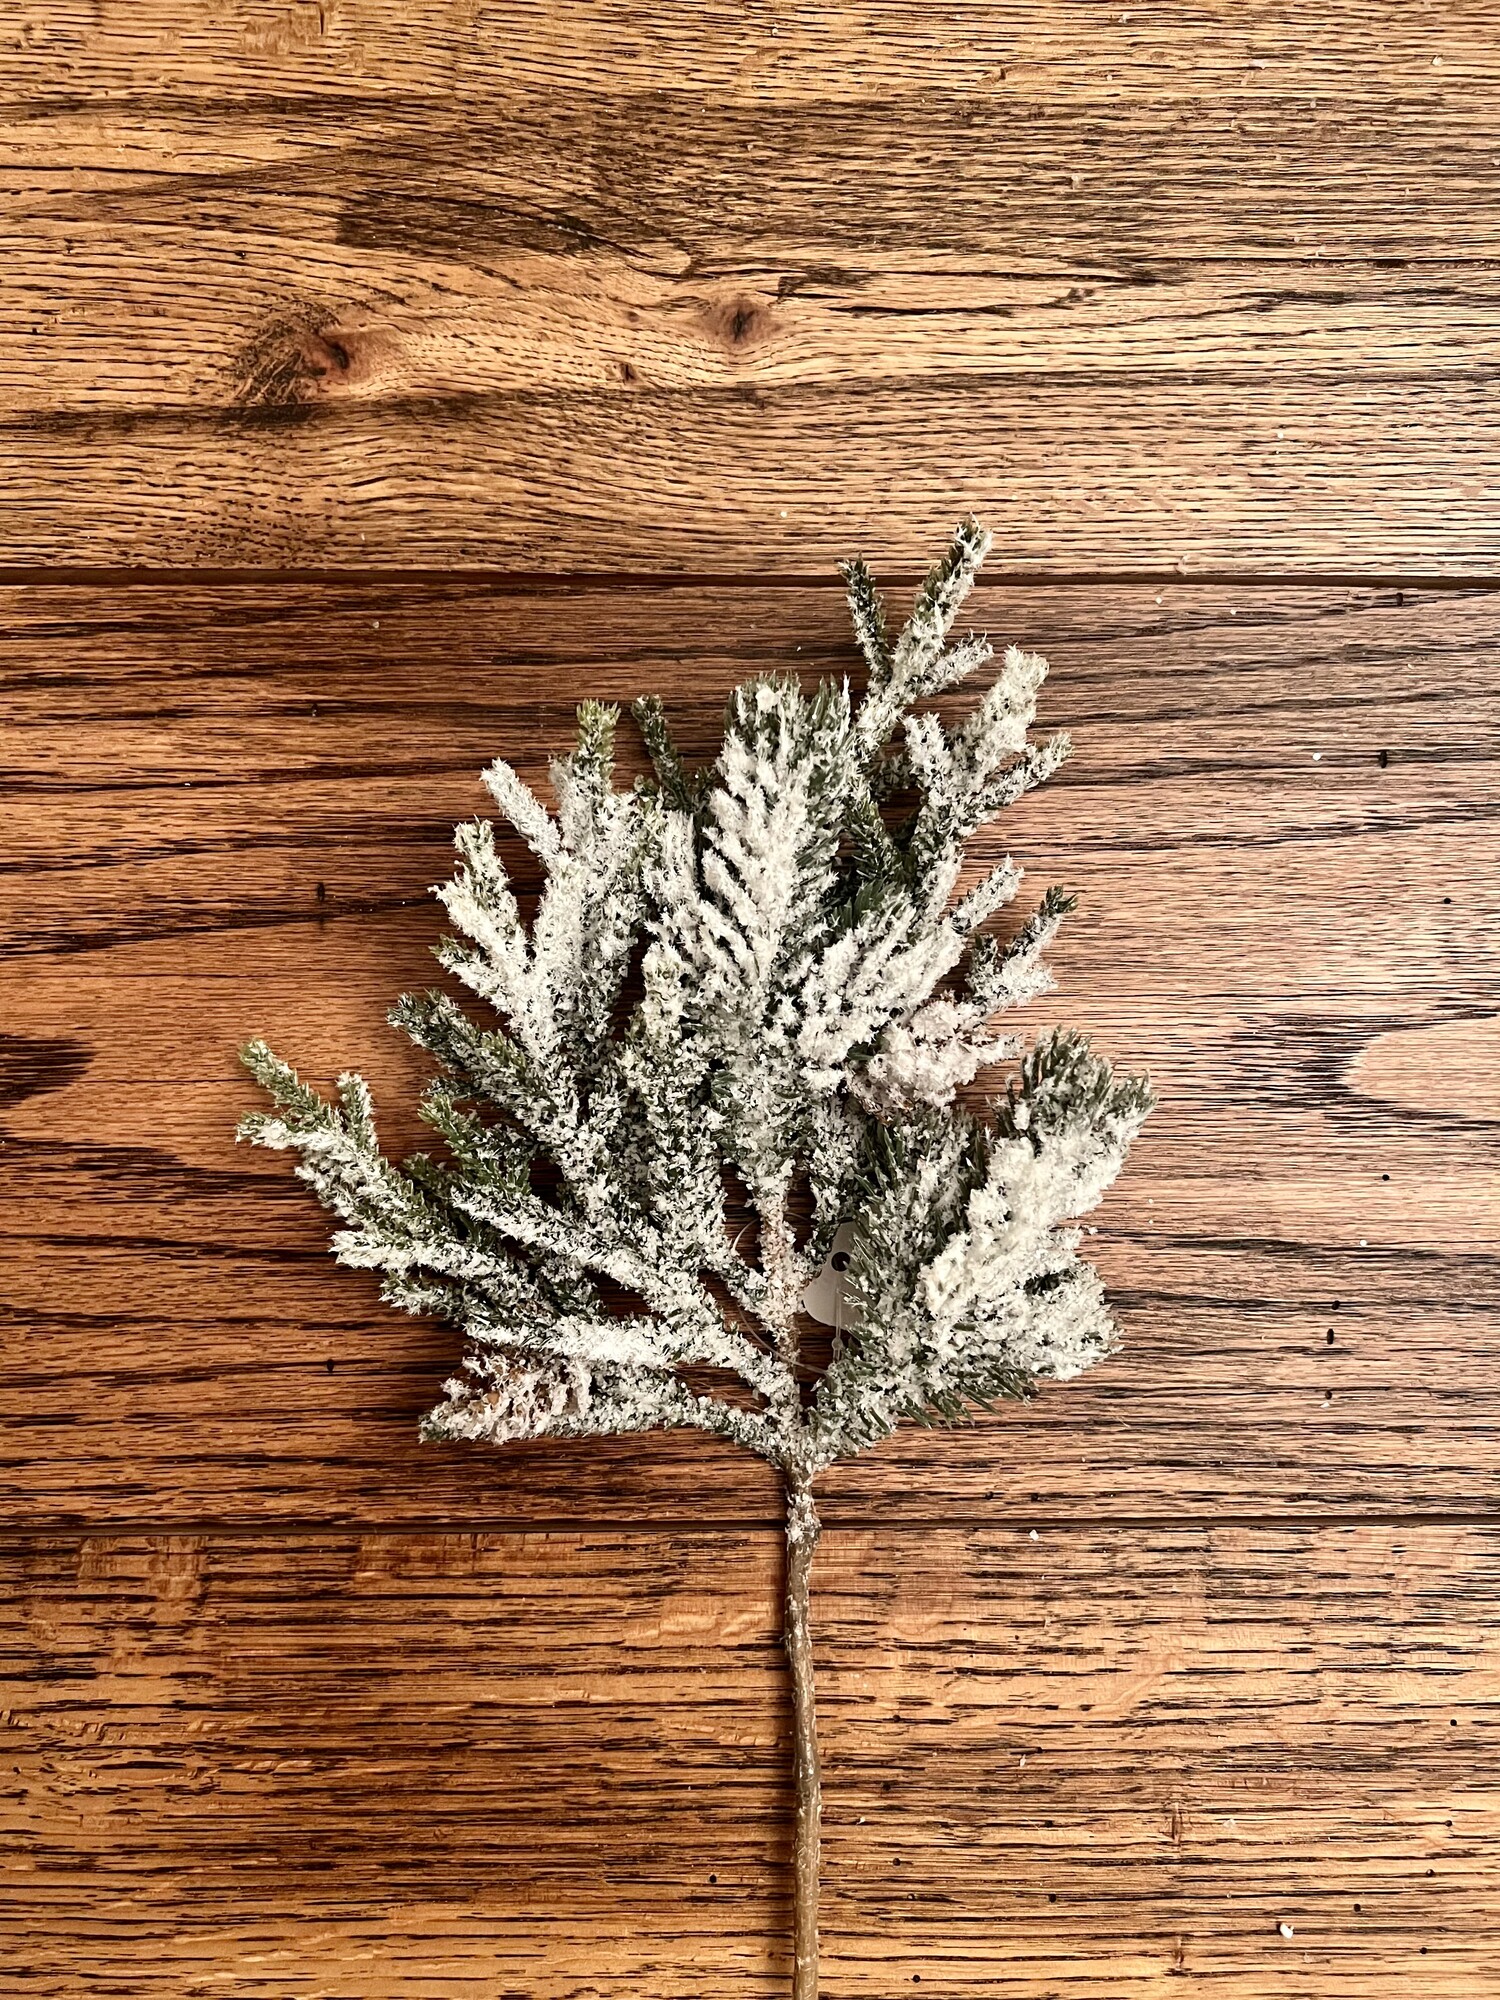 The Snow Pine pick is heavily snowed with small pine cones, a touch of glitter and is the perfect small stem to add warmth to the winter season anywhere in your home. Pick measures 11 inches tall and 6 inches wide